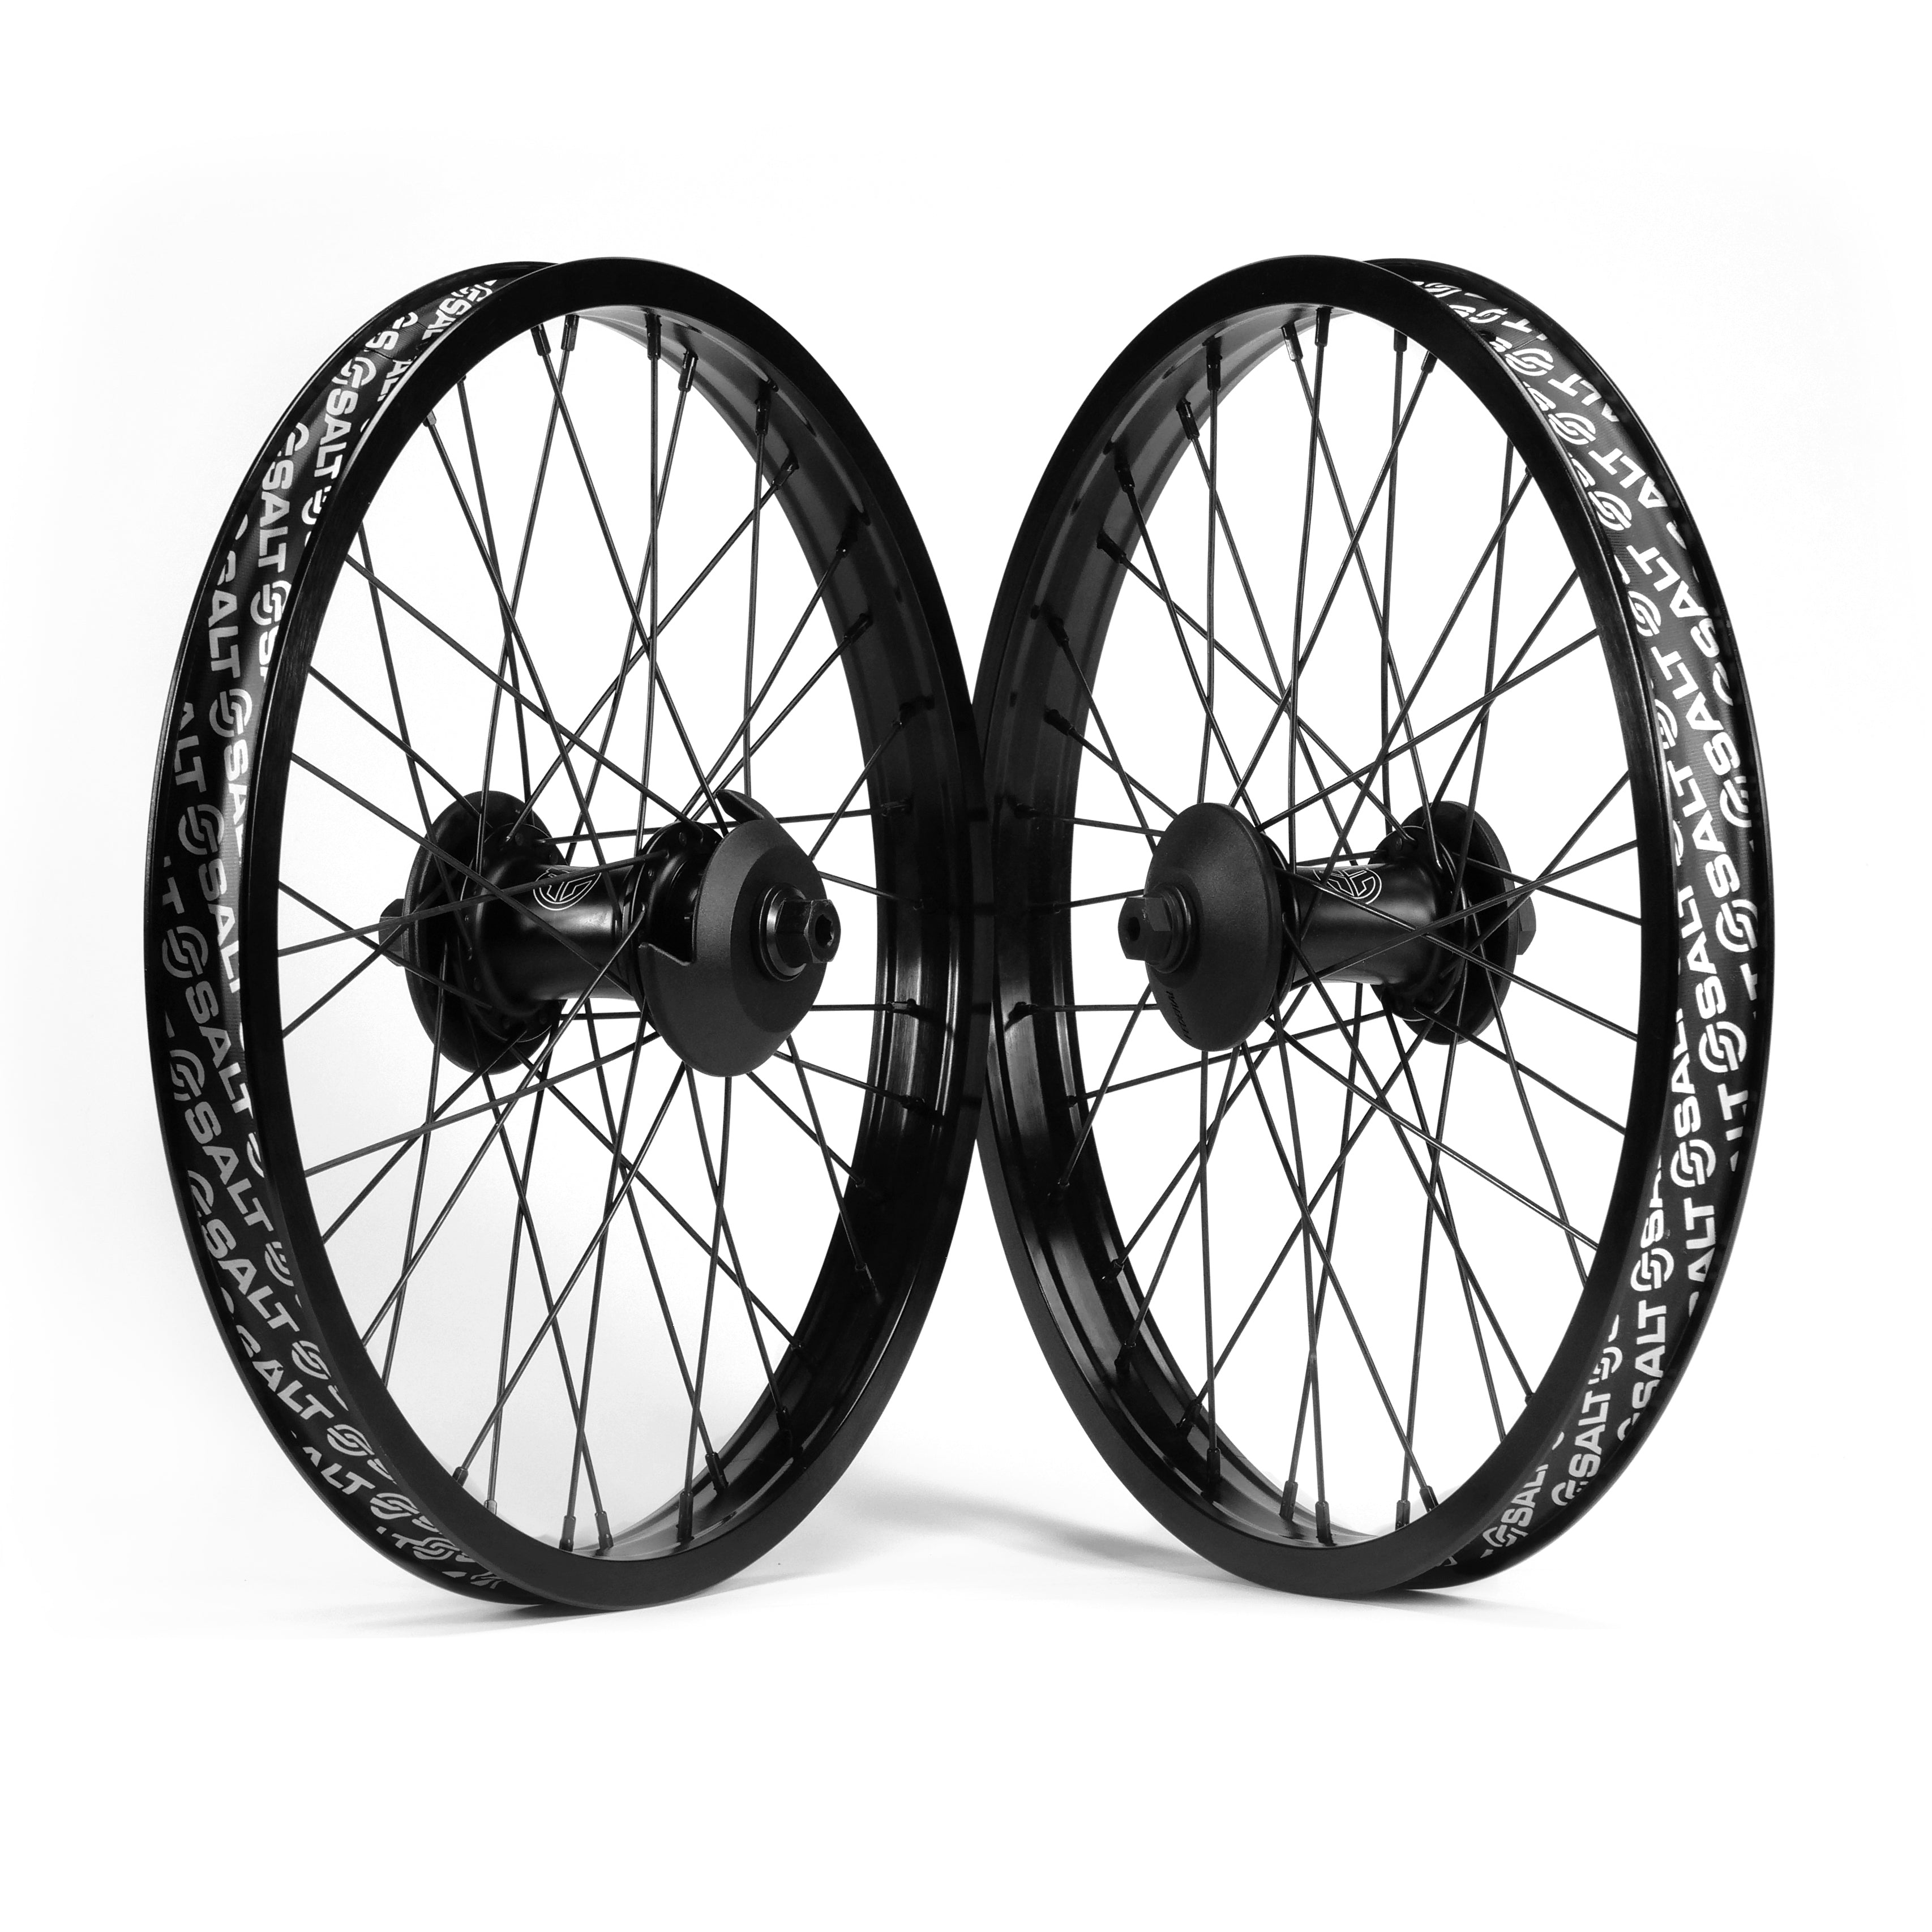 Two Federal Motion x Alienation 18 Custom Wheelsets with intricate spokes and labeled Alienation Black Sheep rims, set against a white background.